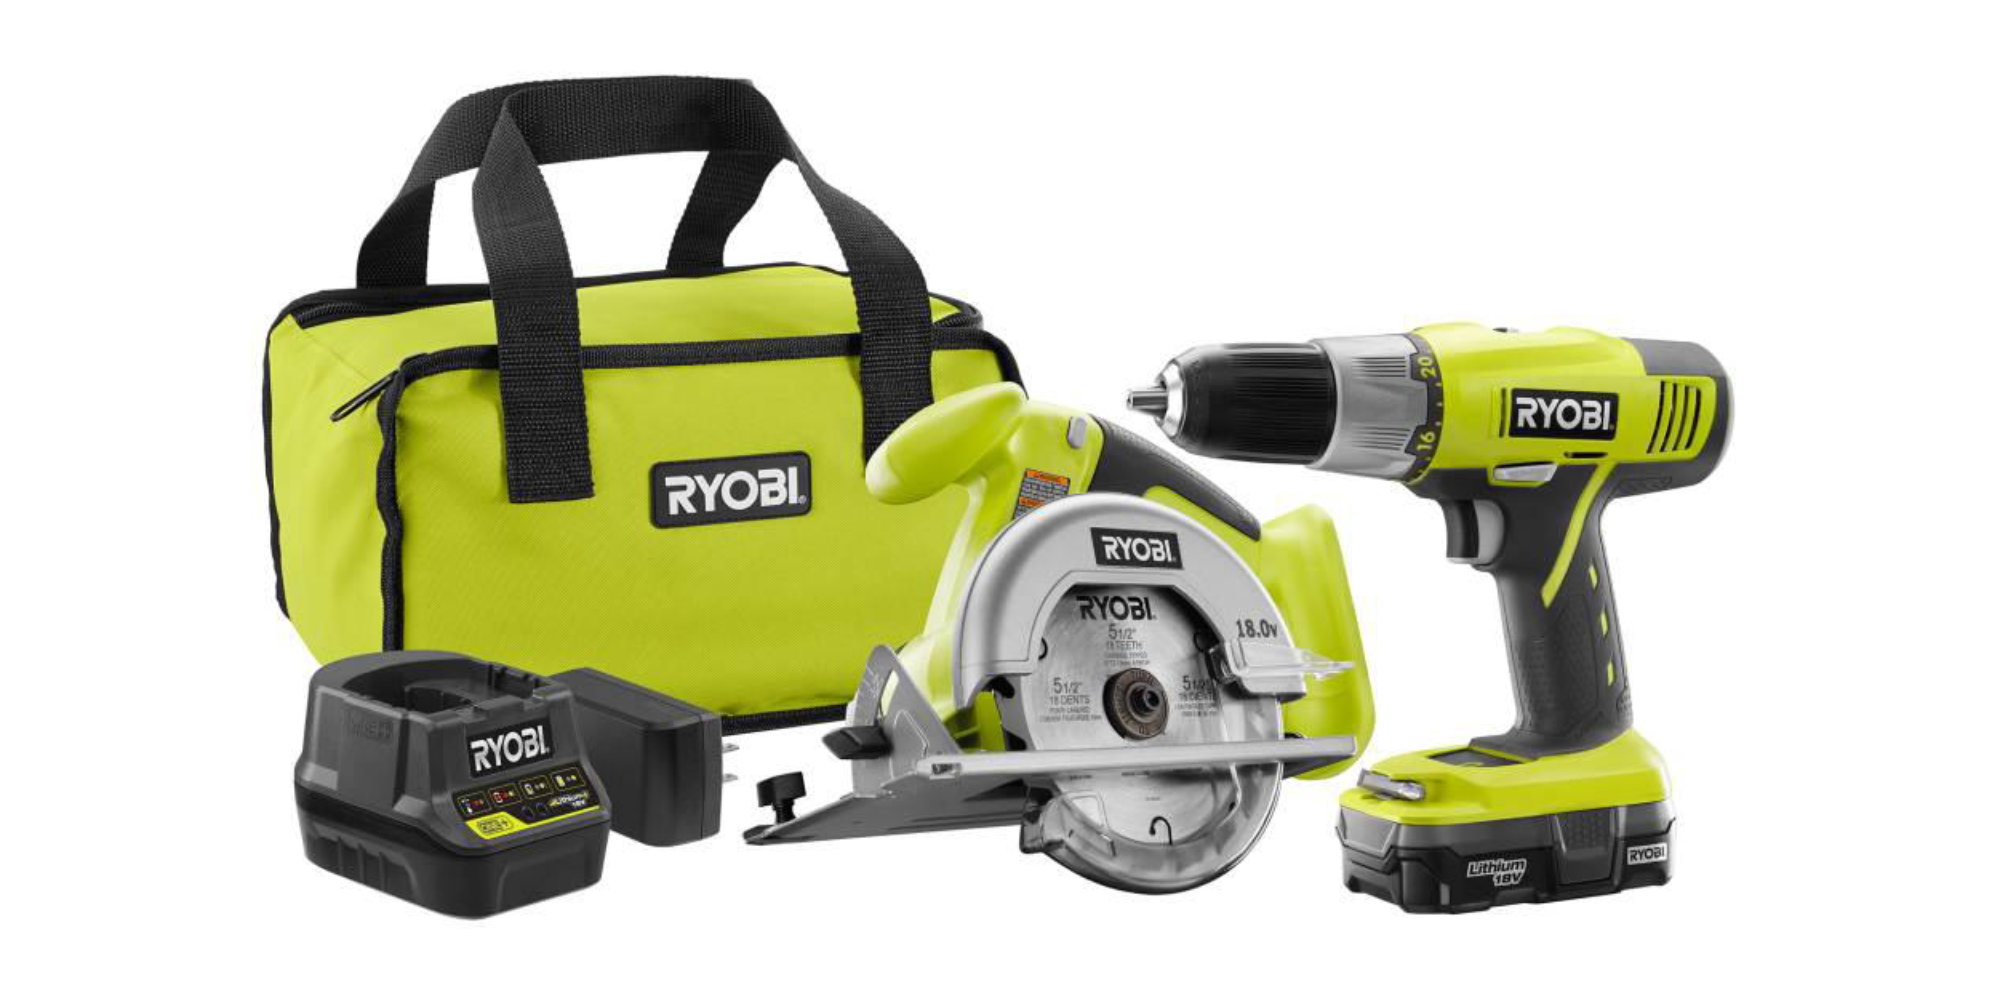 This Ryobi Combo Kit Delivers A Saw And Drill For 79 Shipped Reg 99